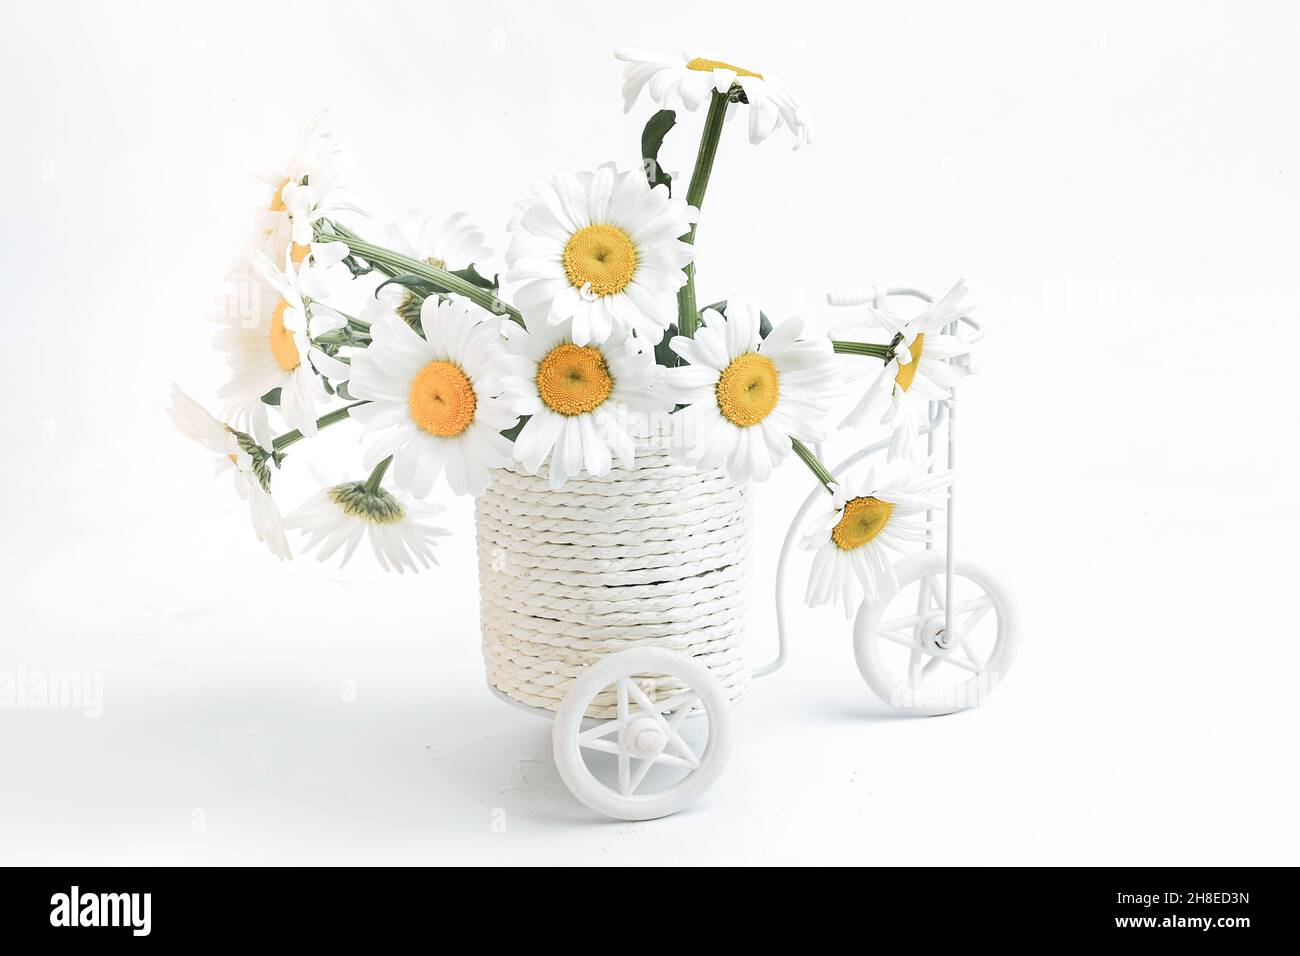 car free day. Ecological concept. Bicycles and plants against the pollution of the world. White bicycle with a bouquet of daisies.. Stock Photo